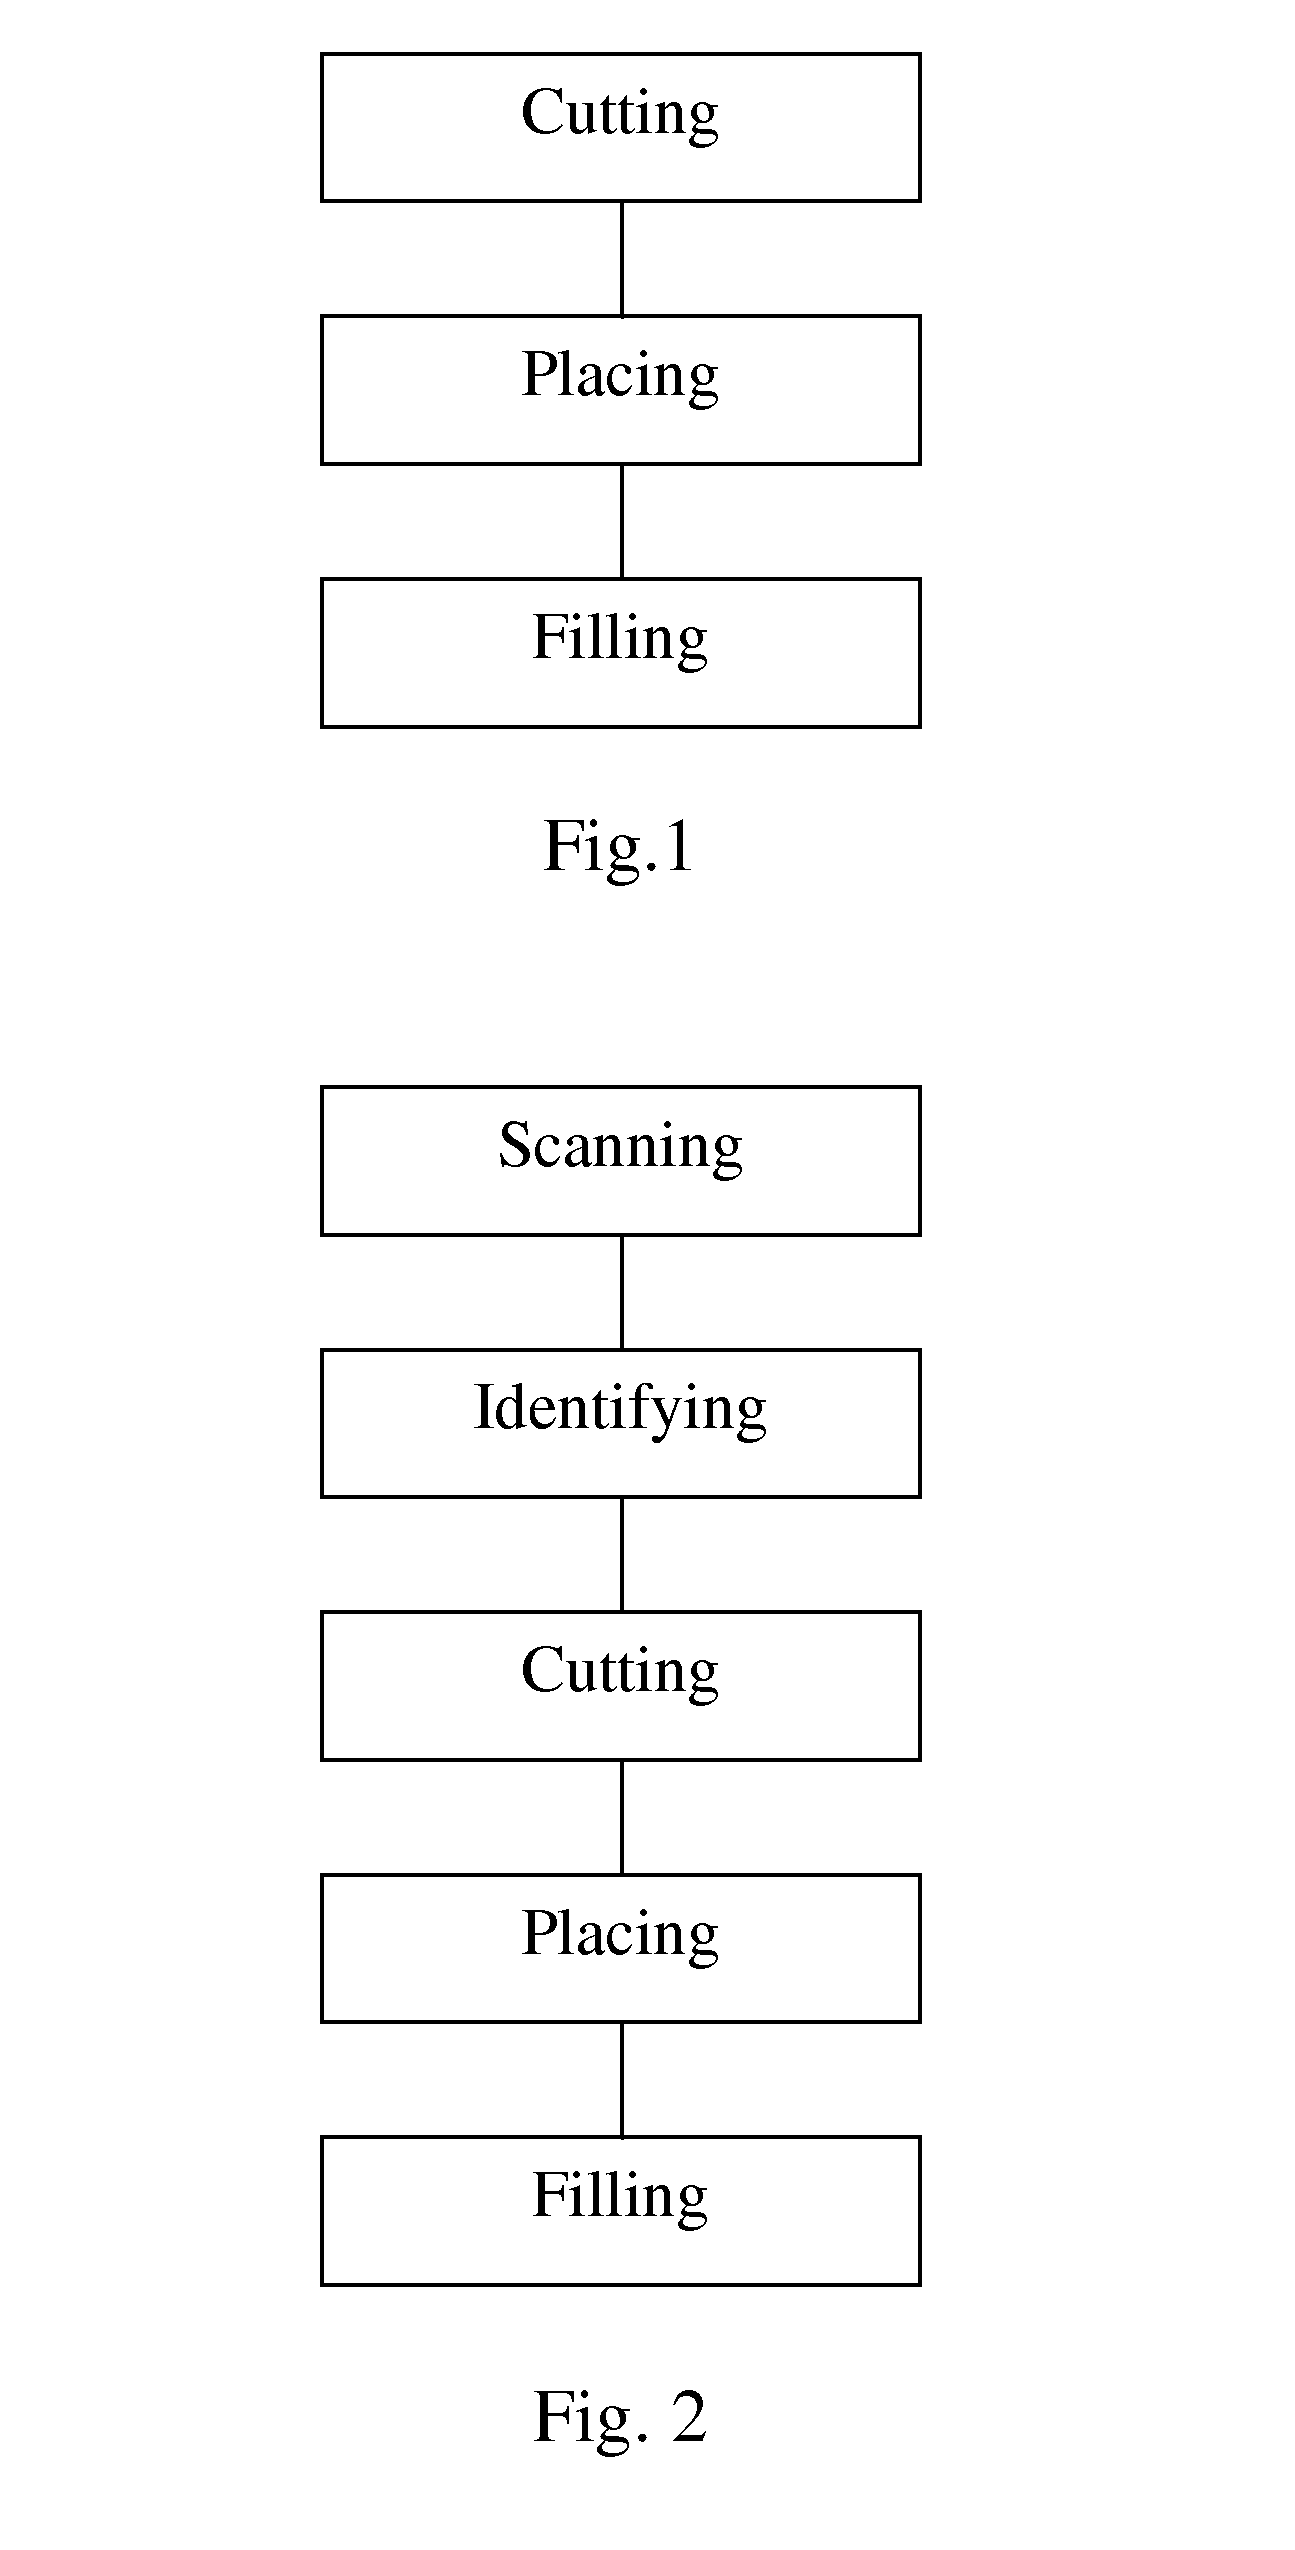 Method for placing at least one duct/communication cable below a road surface in an area